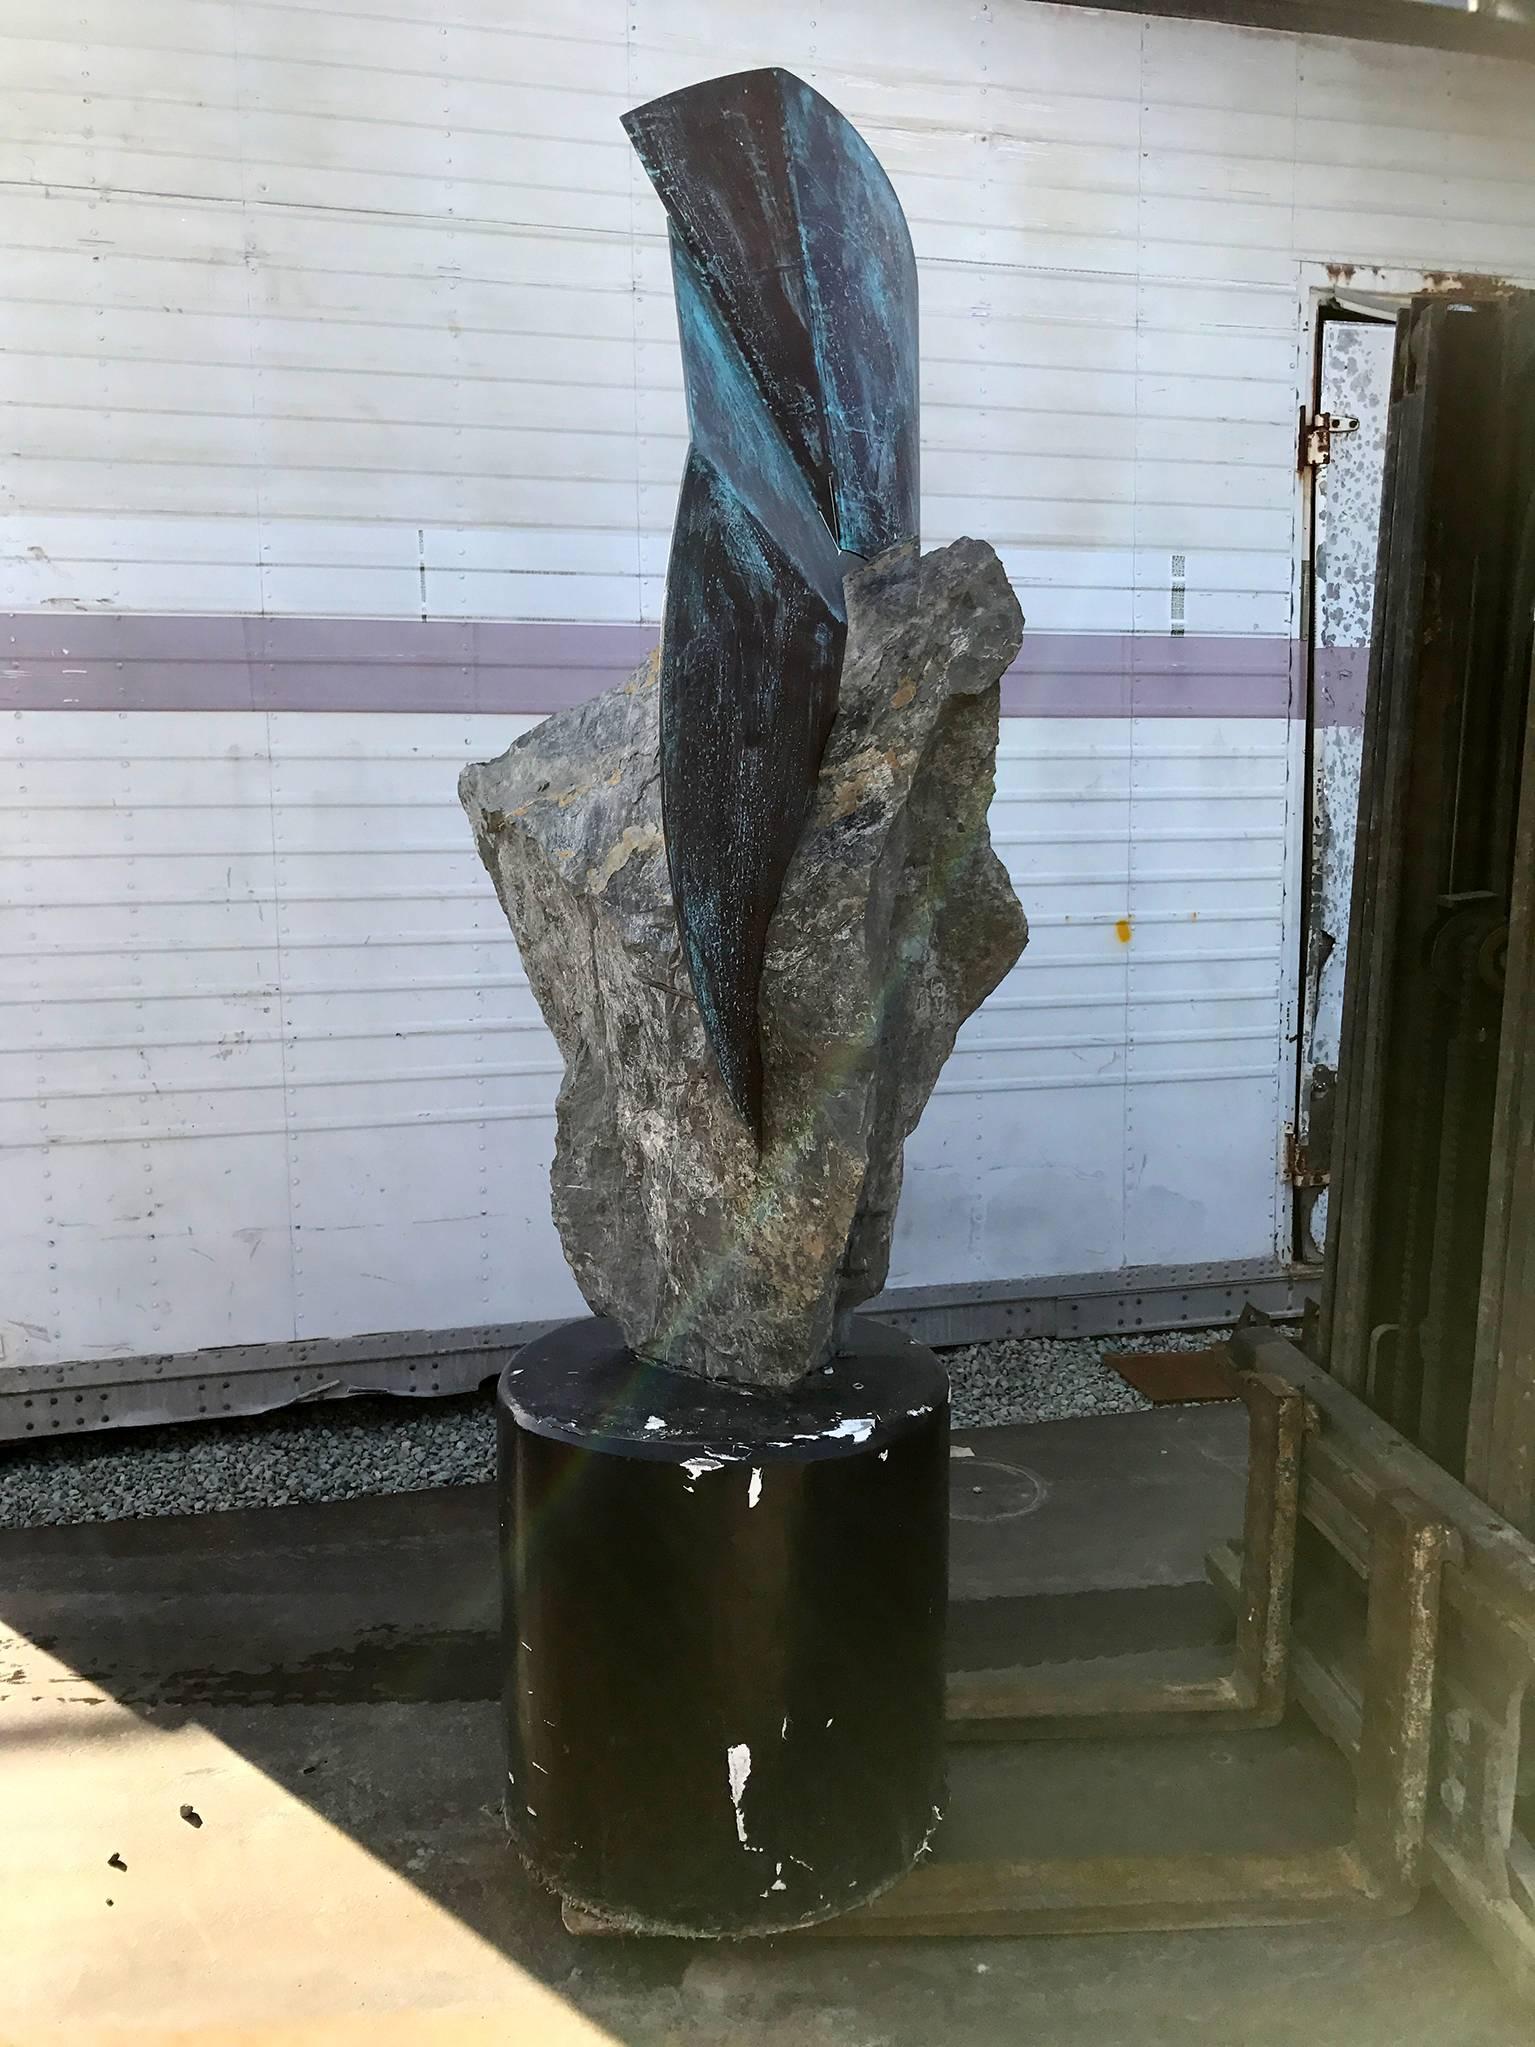 For your consideration a contemporary sculpture over 7' tall. 

Stone mounted with a cement base (painted in black) and upper section in patinated copper. 

Beautiful abstract or contemporary look. 

No information from the maker. Sculpture